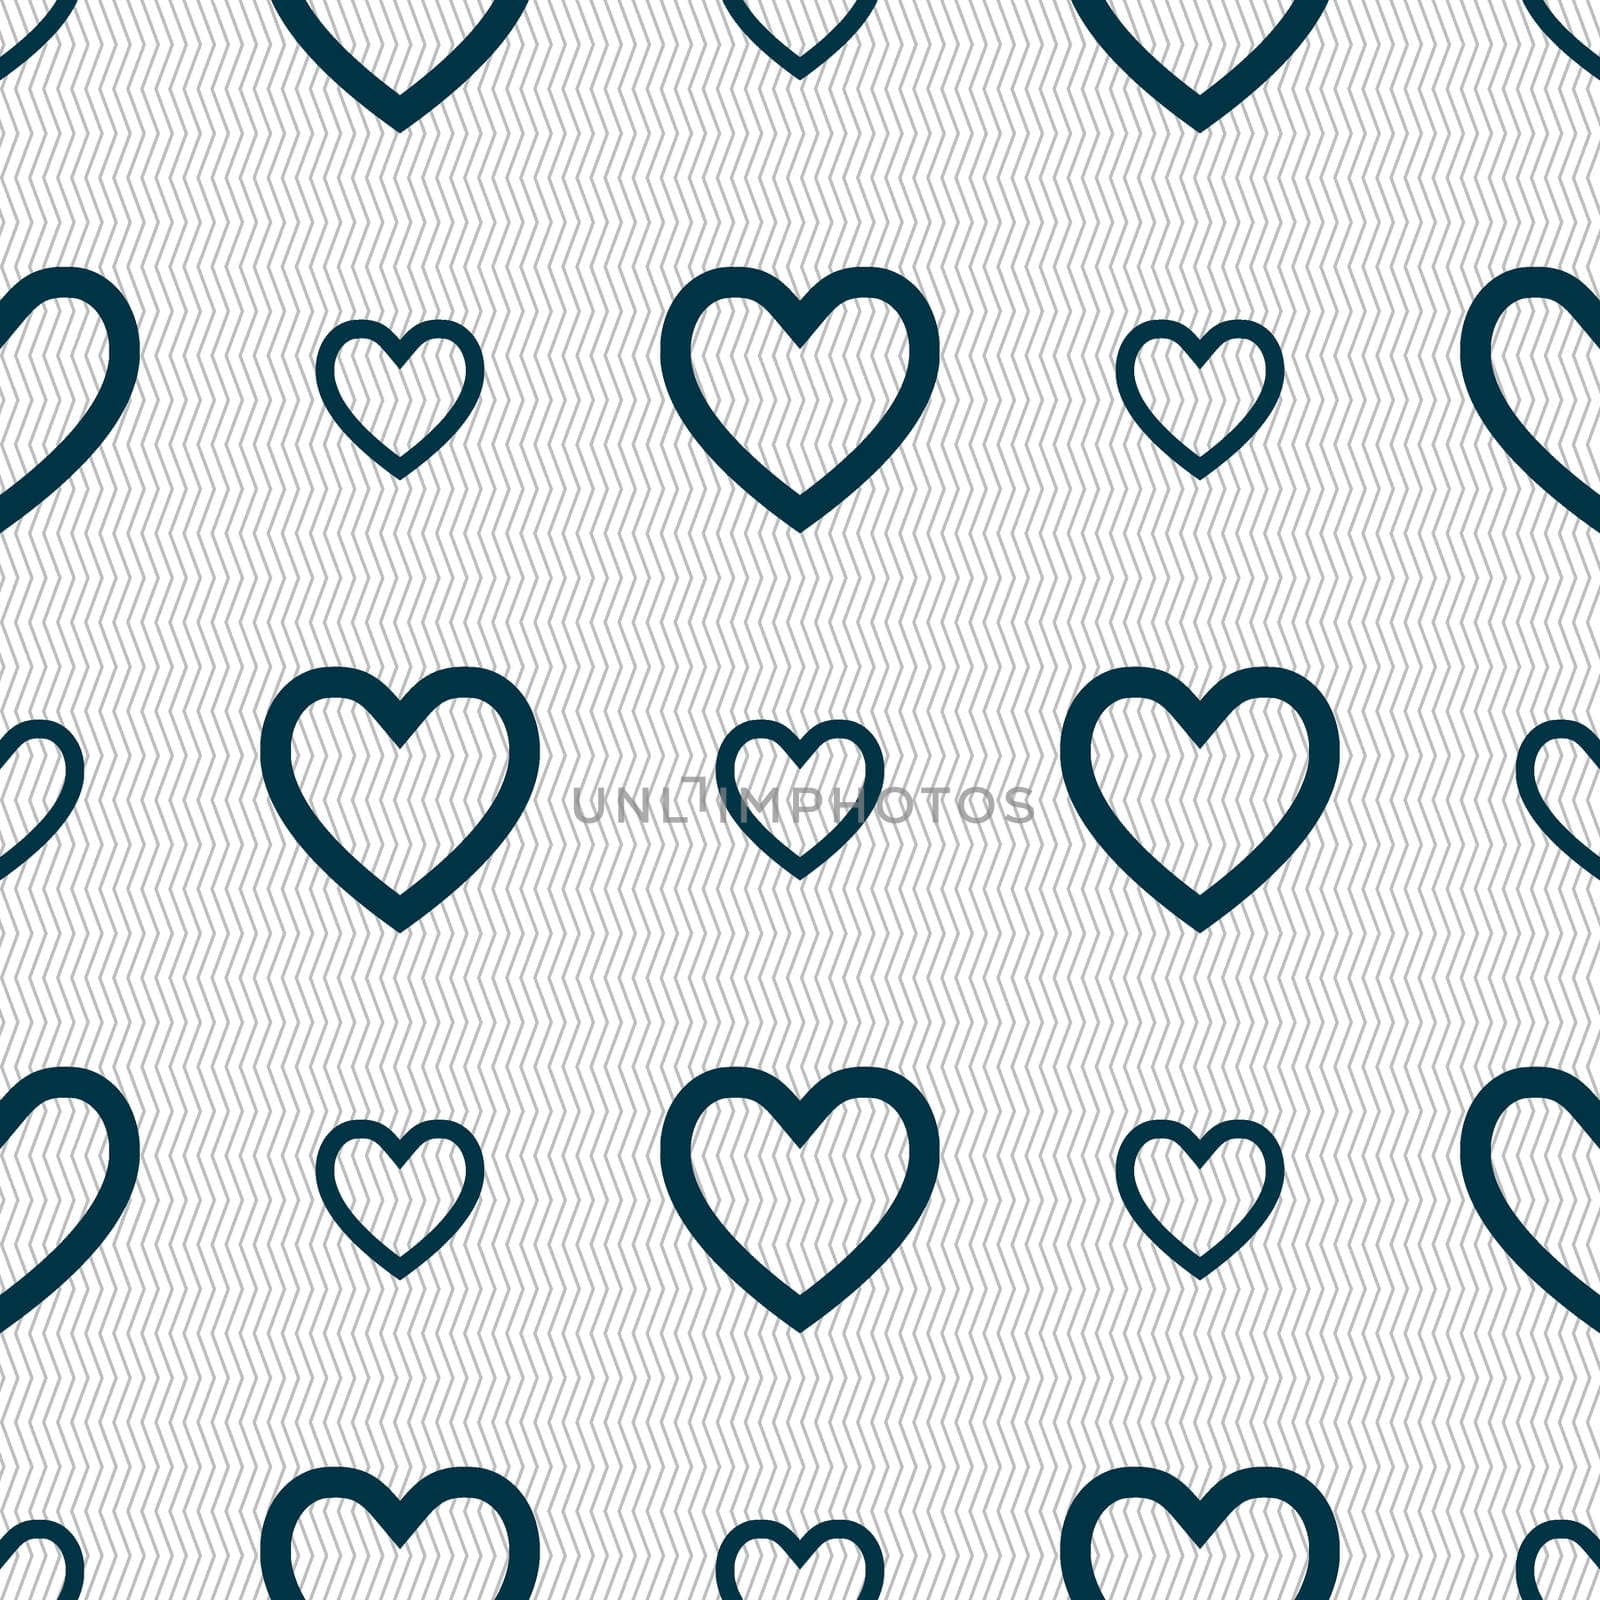 Heart sign icon. Love symbol. Seamless abstract background with geometric shapes. illustration